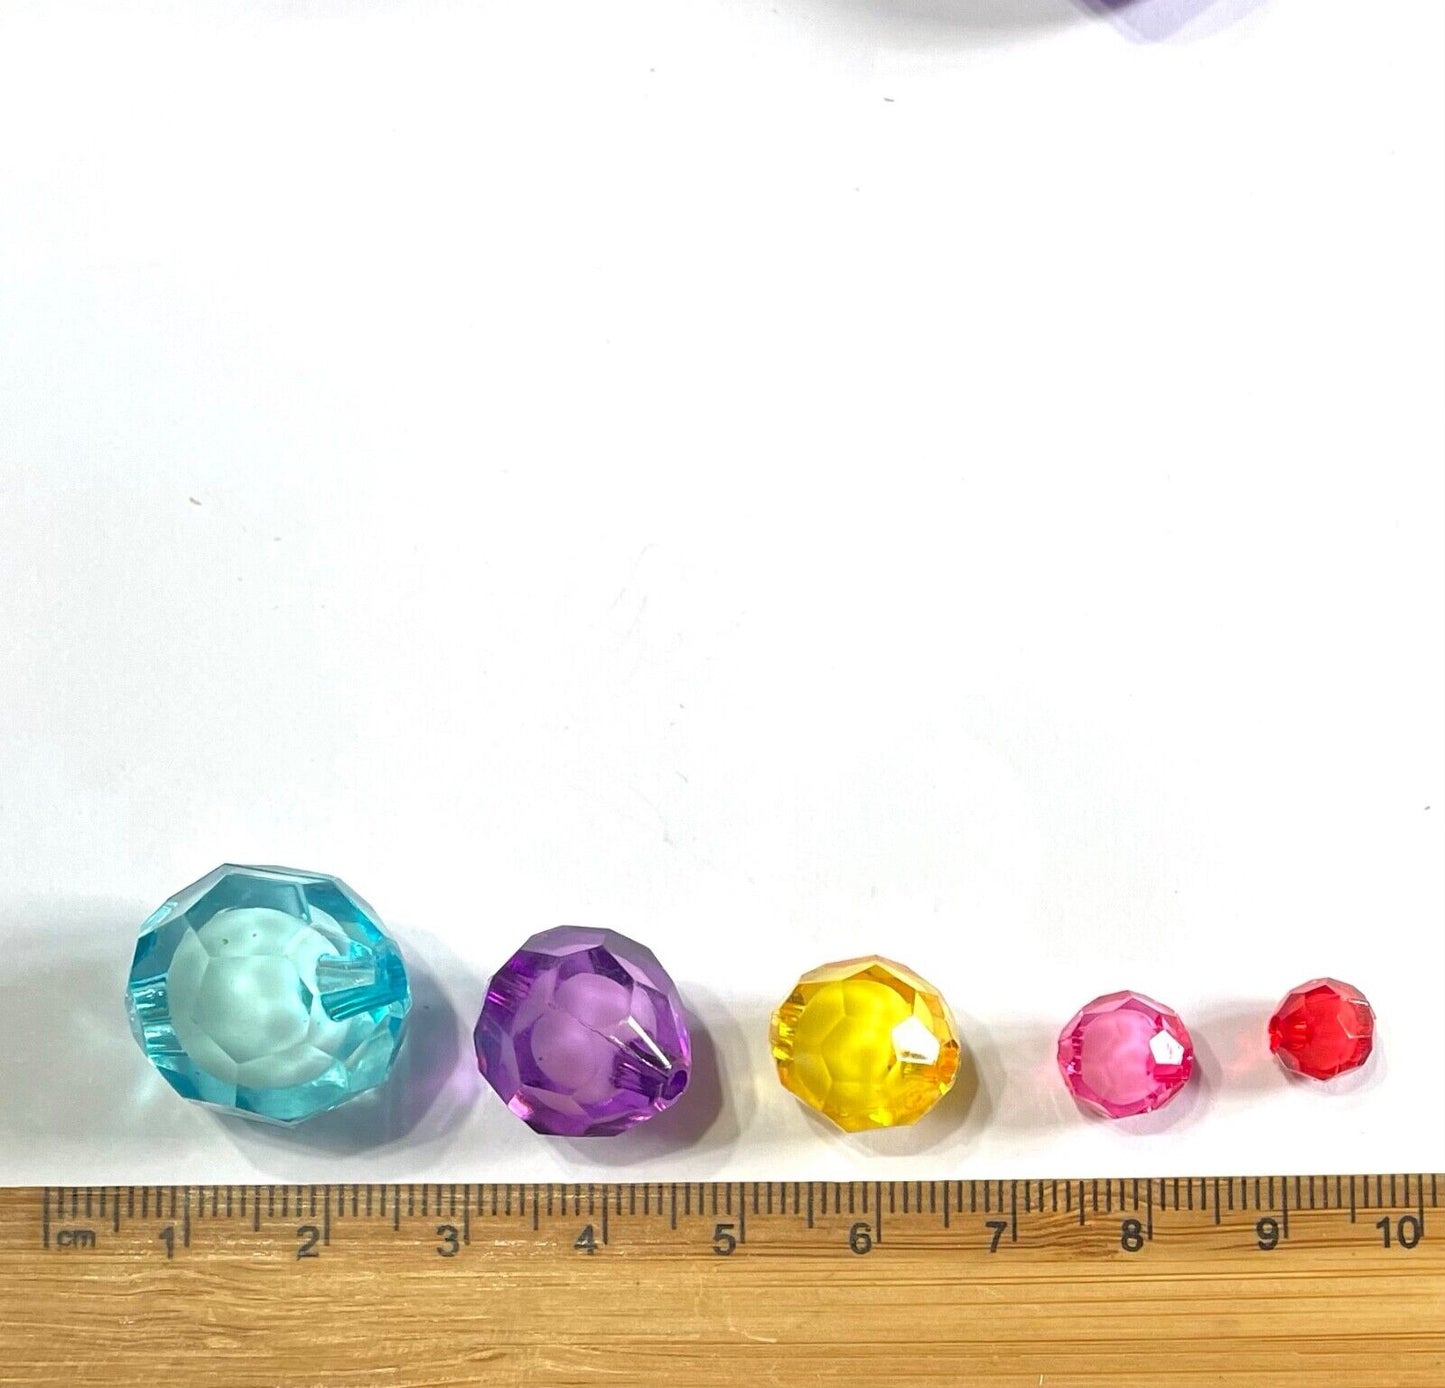 100x Faceted 7mm to 20mm Round Multicolour with White Core  Acrylic Beads